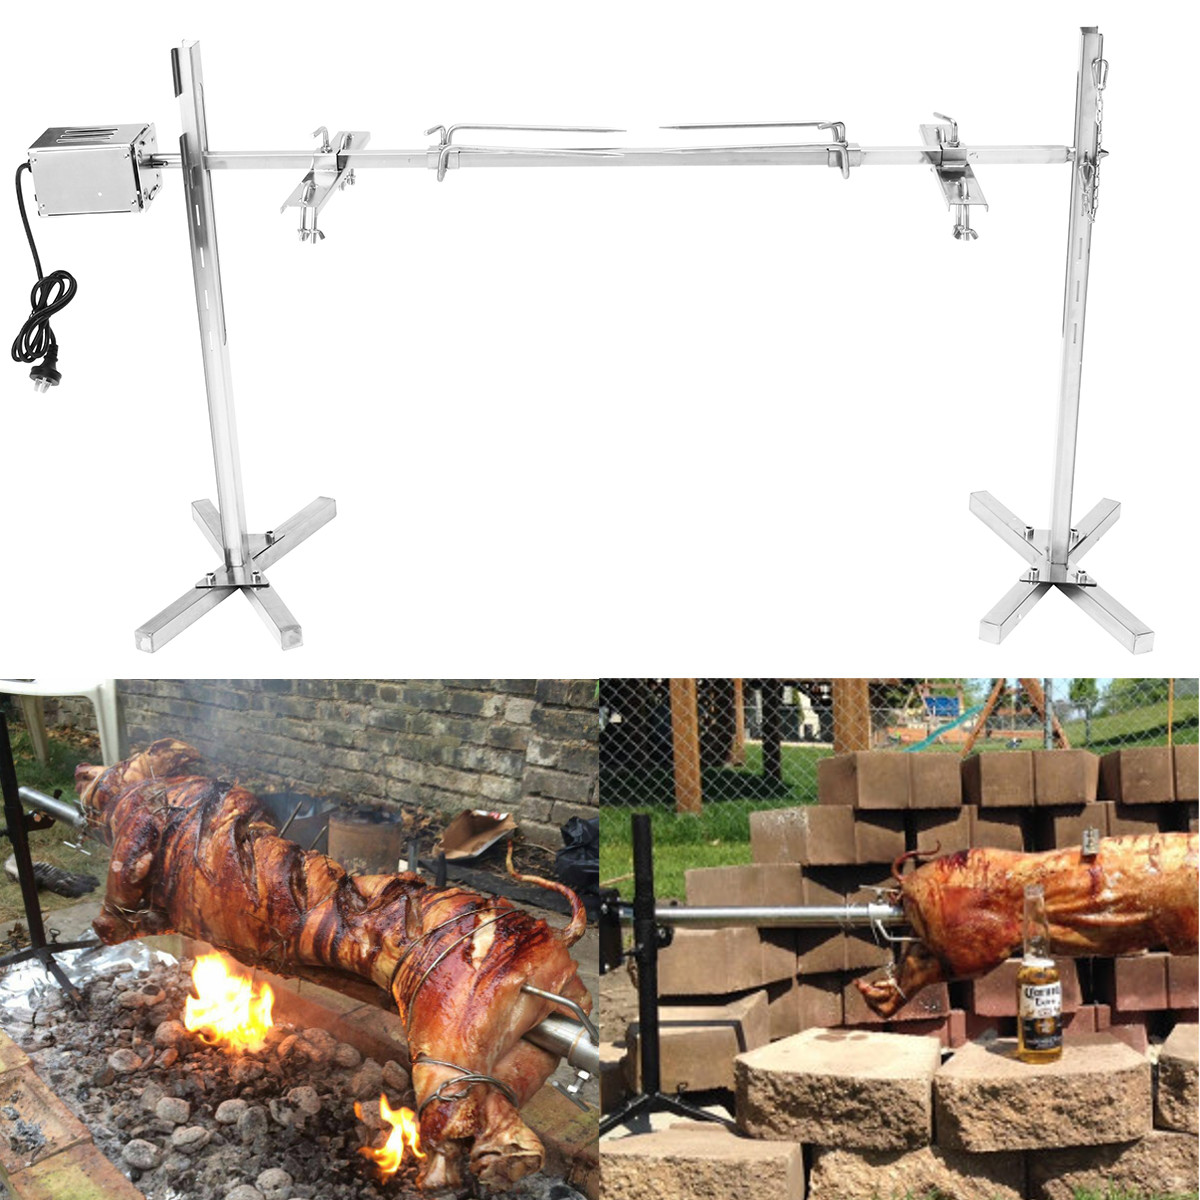 220V-15W-Stainless-Steel-Portable-Rotisserie-Grill-Spit-Tripod-BBQ-Lamb-Camping-Roaster-BBQ-Grill-1411901-5